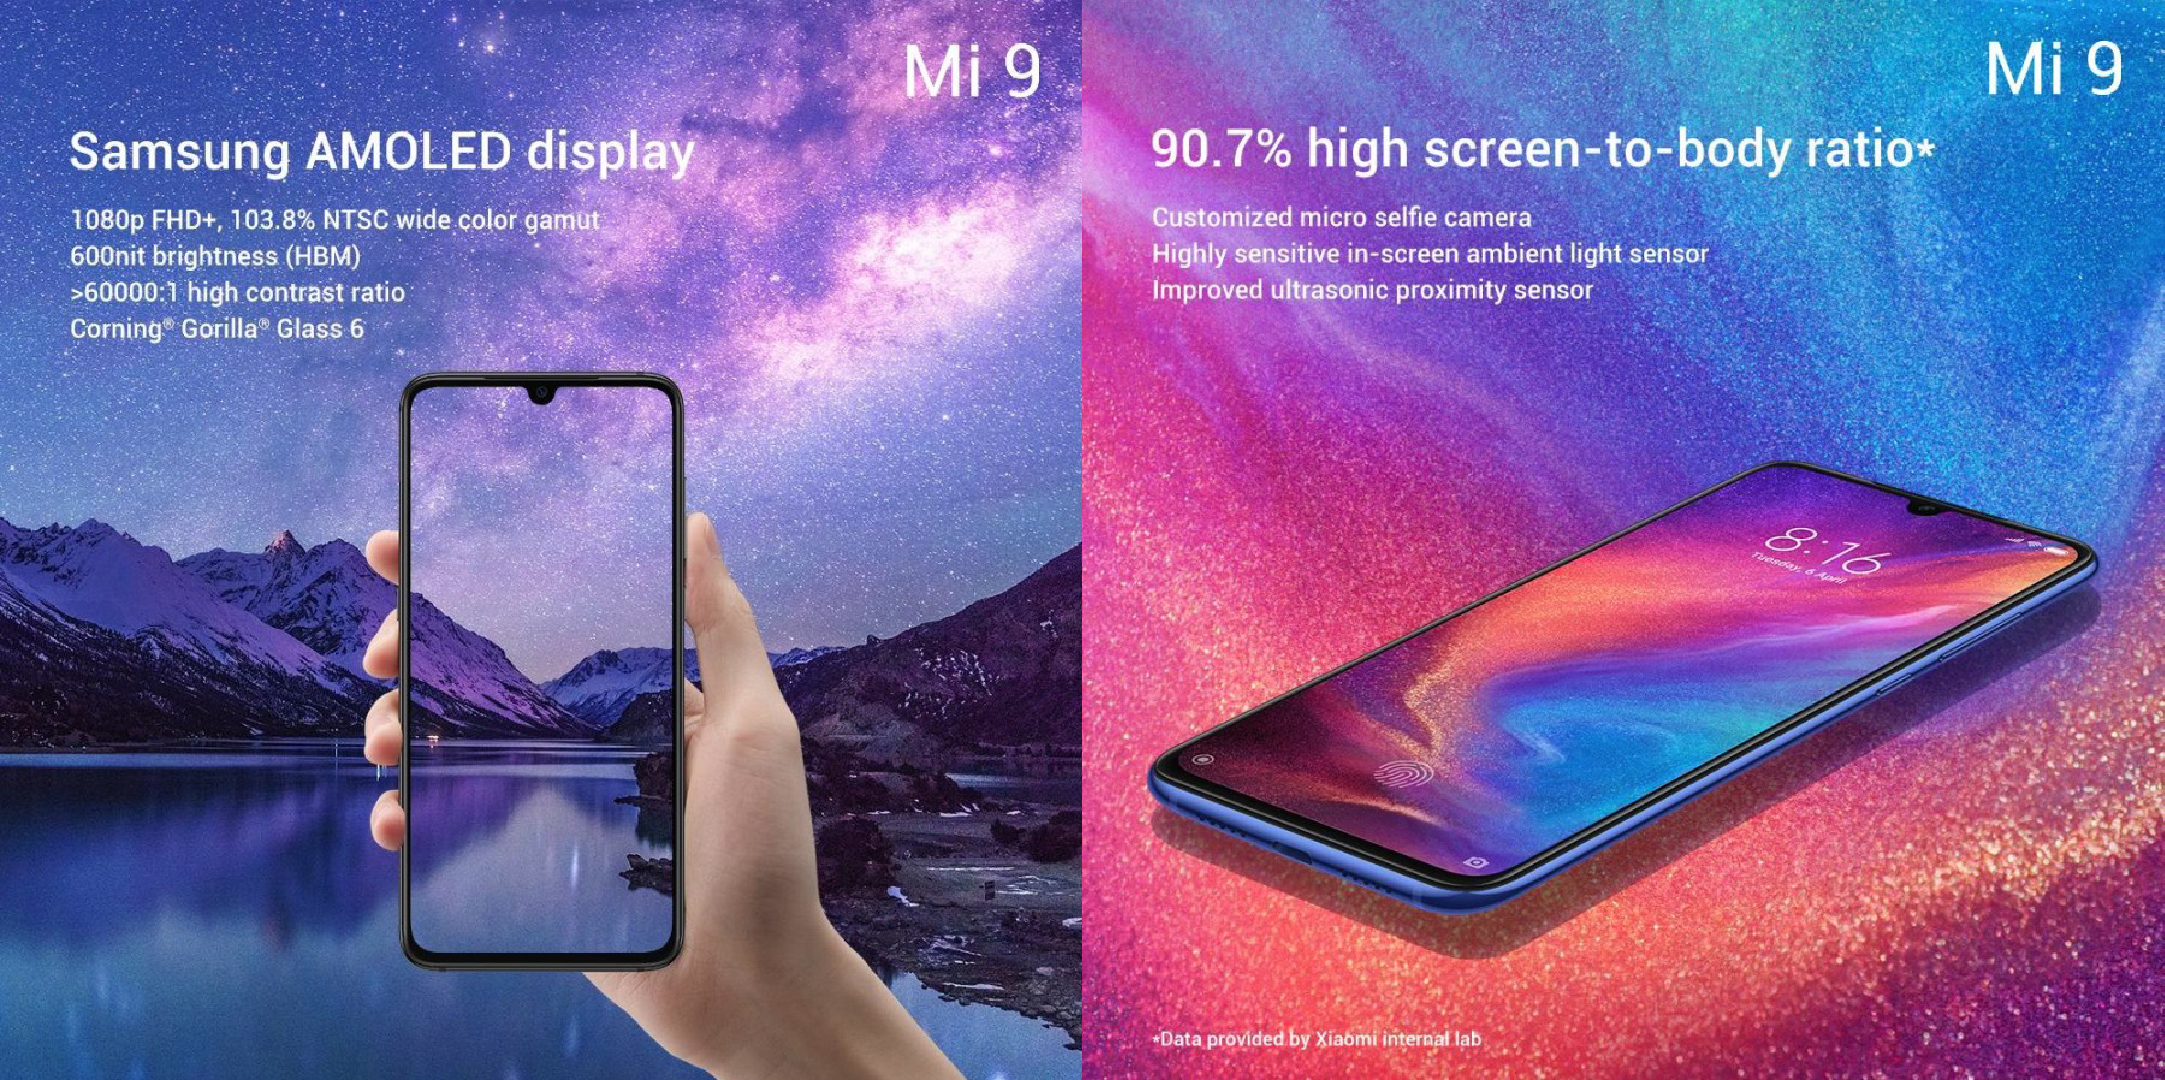 Xiaomi Shared More Features of Mi 9 Including Display Specs